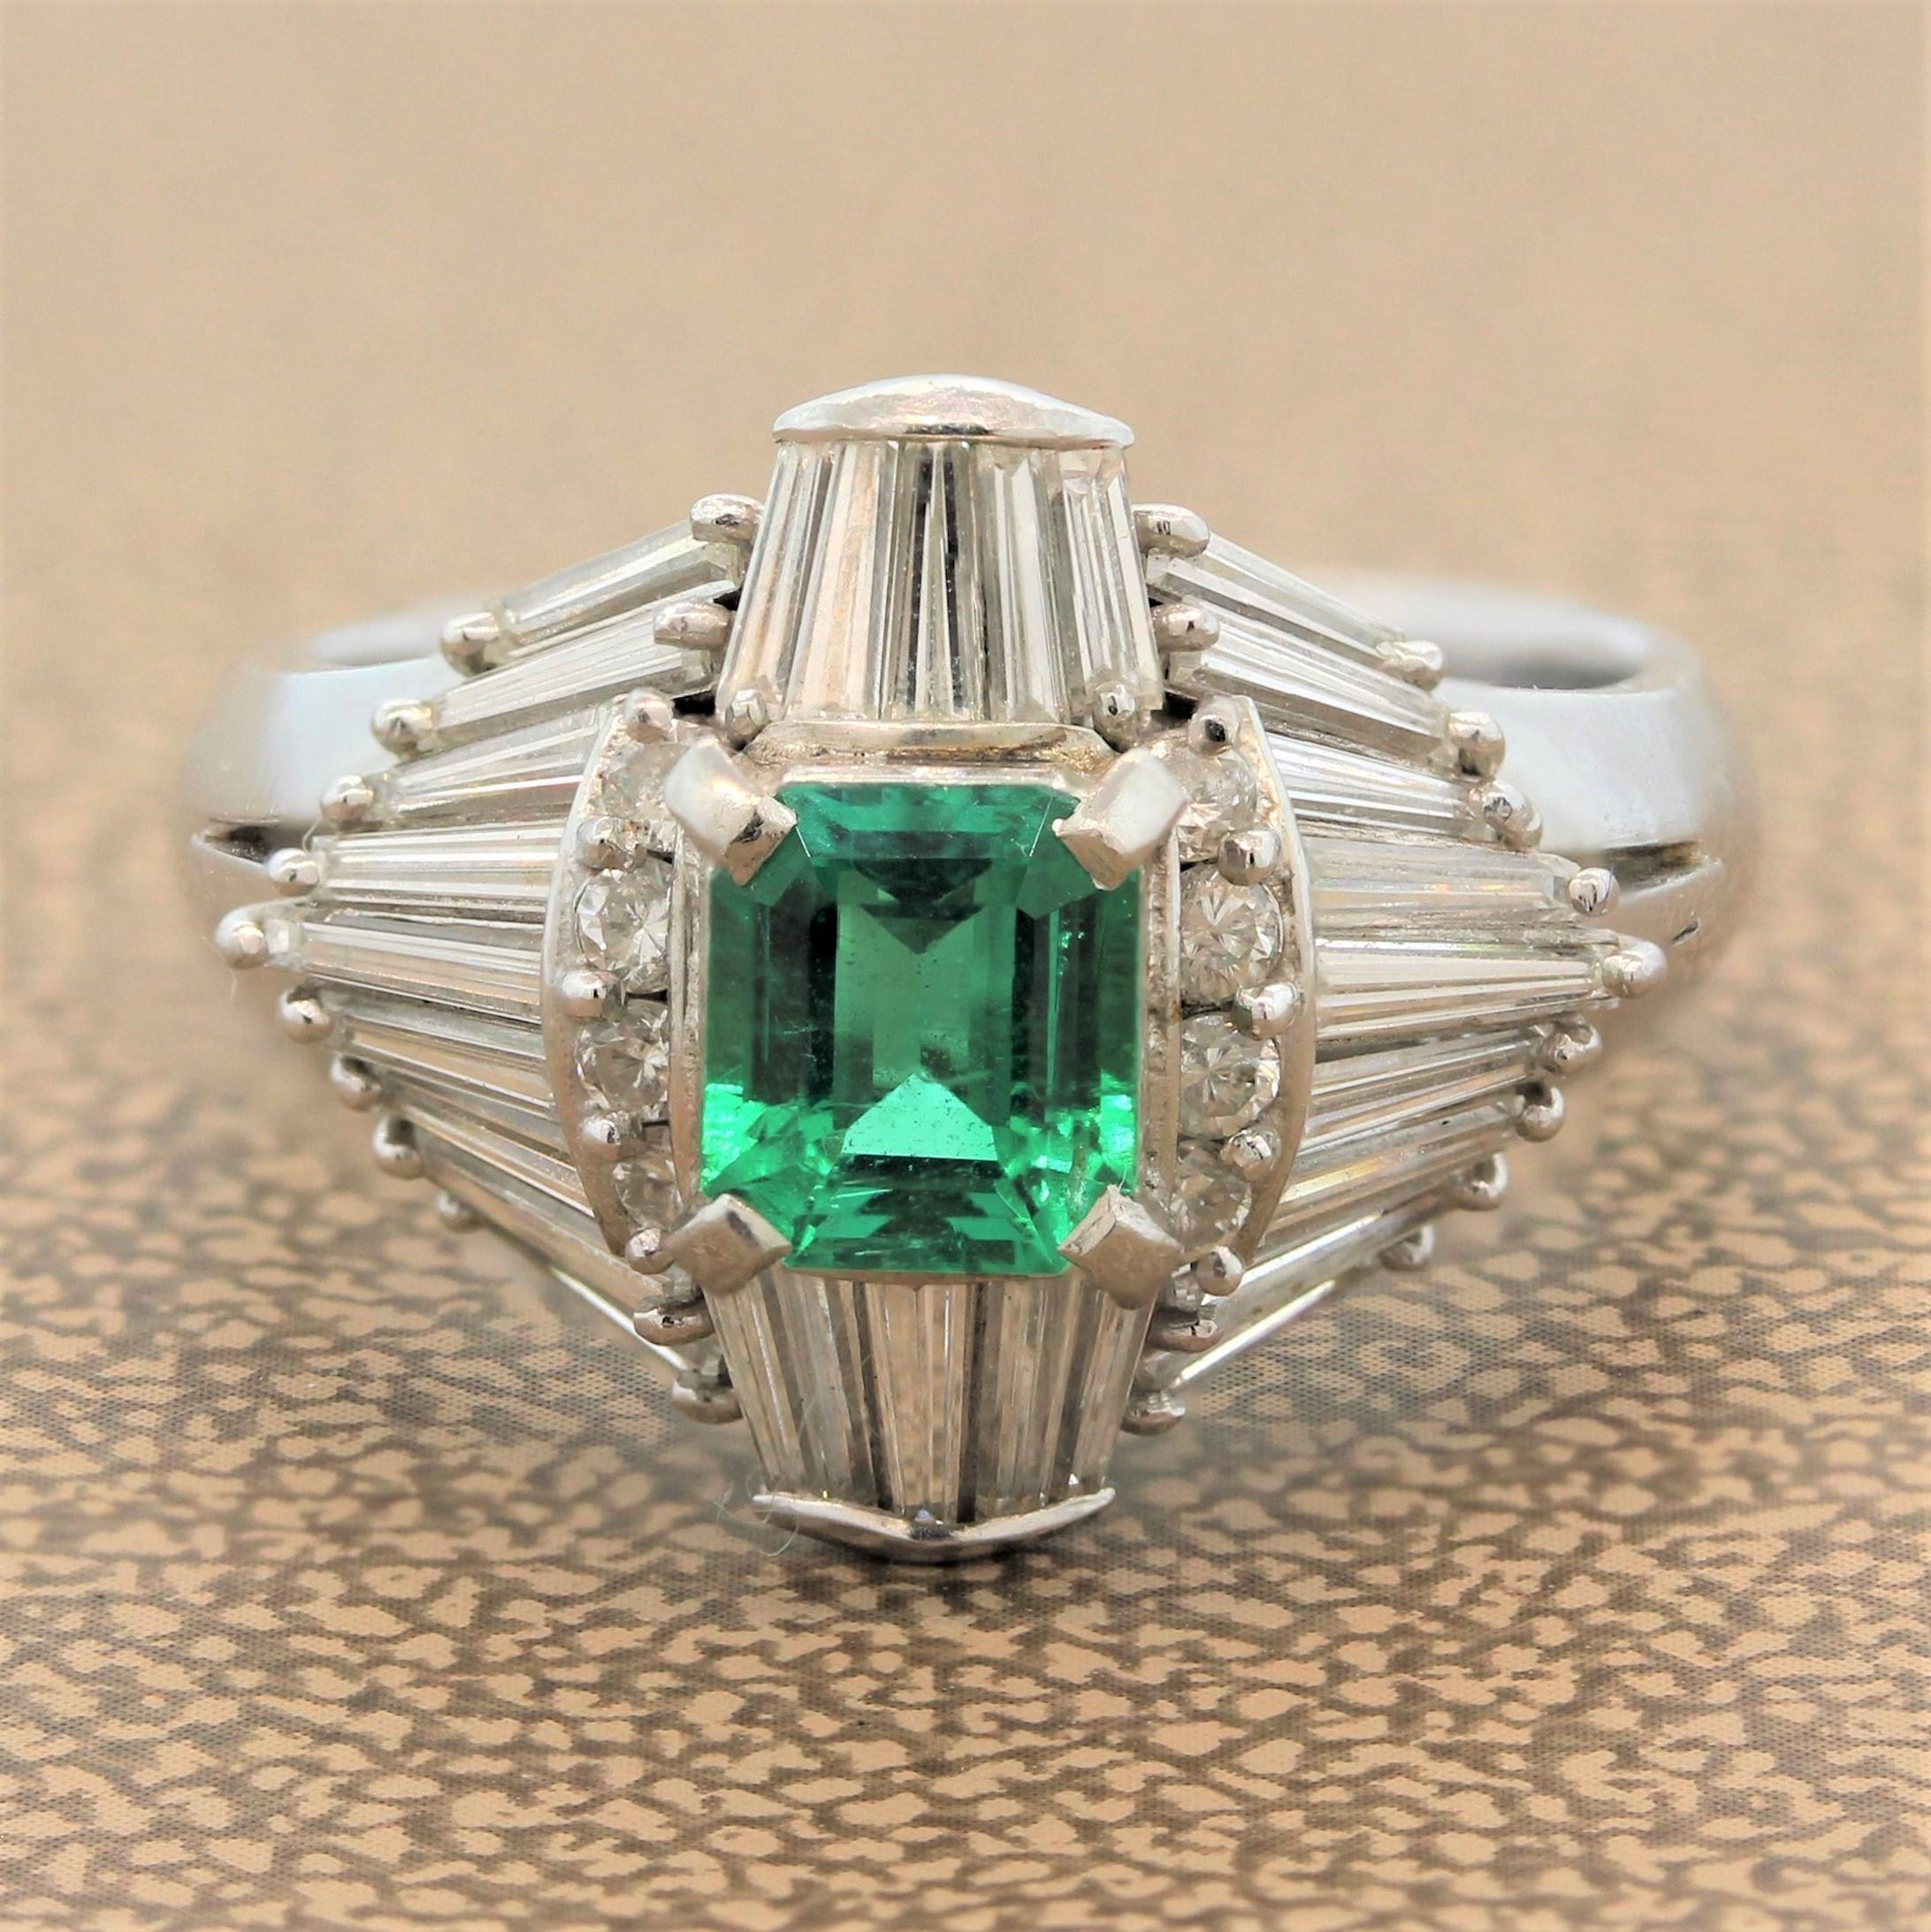 This ornate ring features a 0.68 carat emerald with a lush deep green color associated with the best stones from Colombia. The emerald cut emerald is enclosed by 1.03 carats of colorless baguette cut and round cut diamonds in a platinum